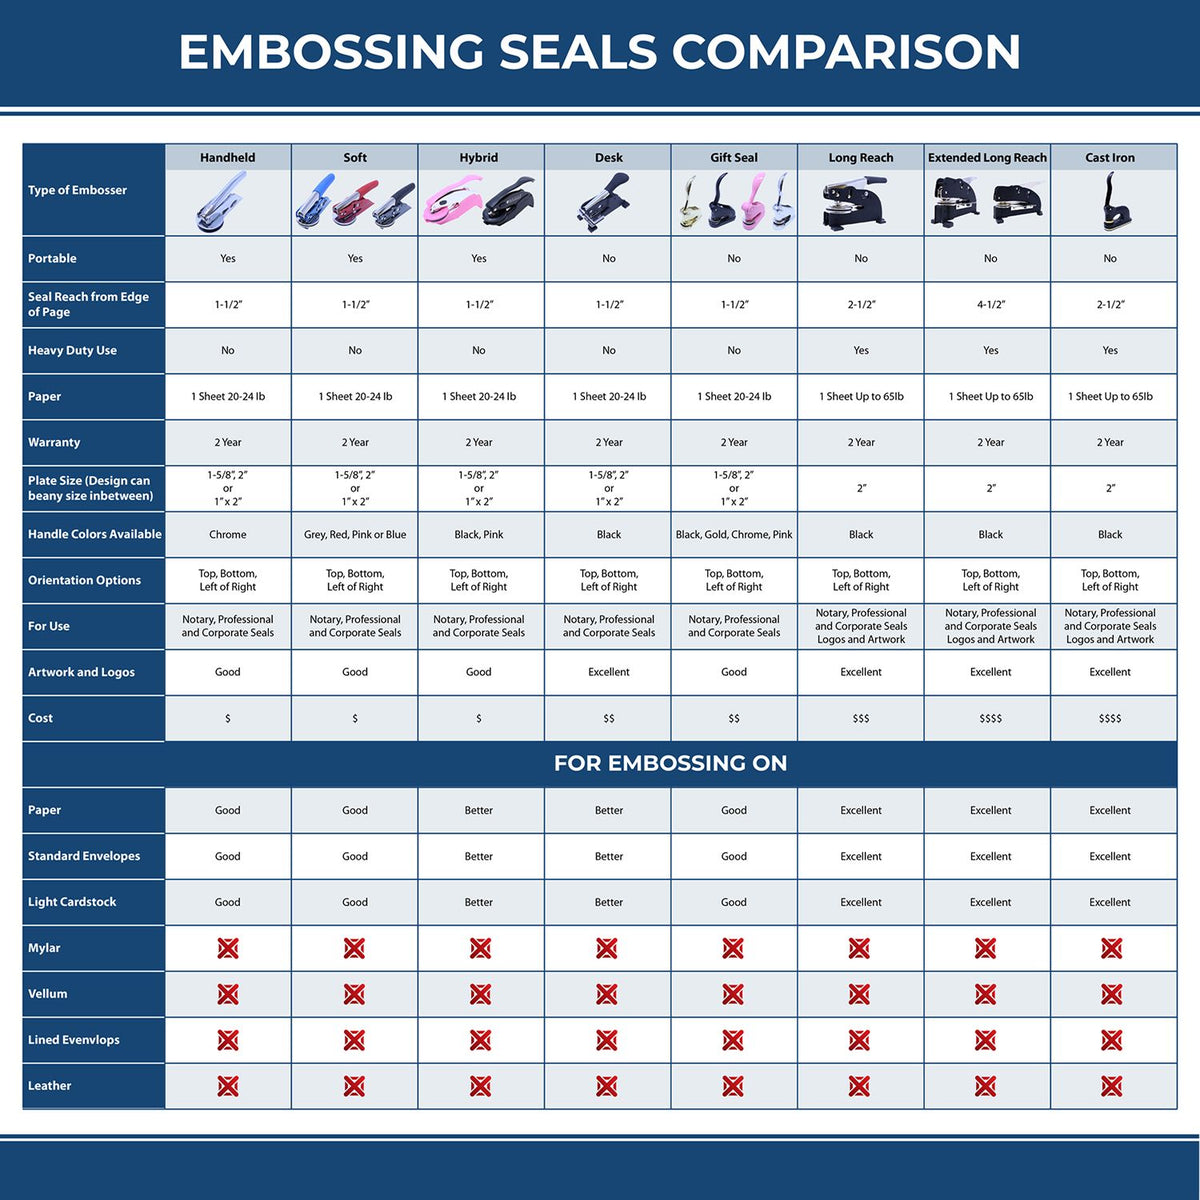 A comparison chart for the different types of mount models available for the Hybrid Arkansas Engineer Seal